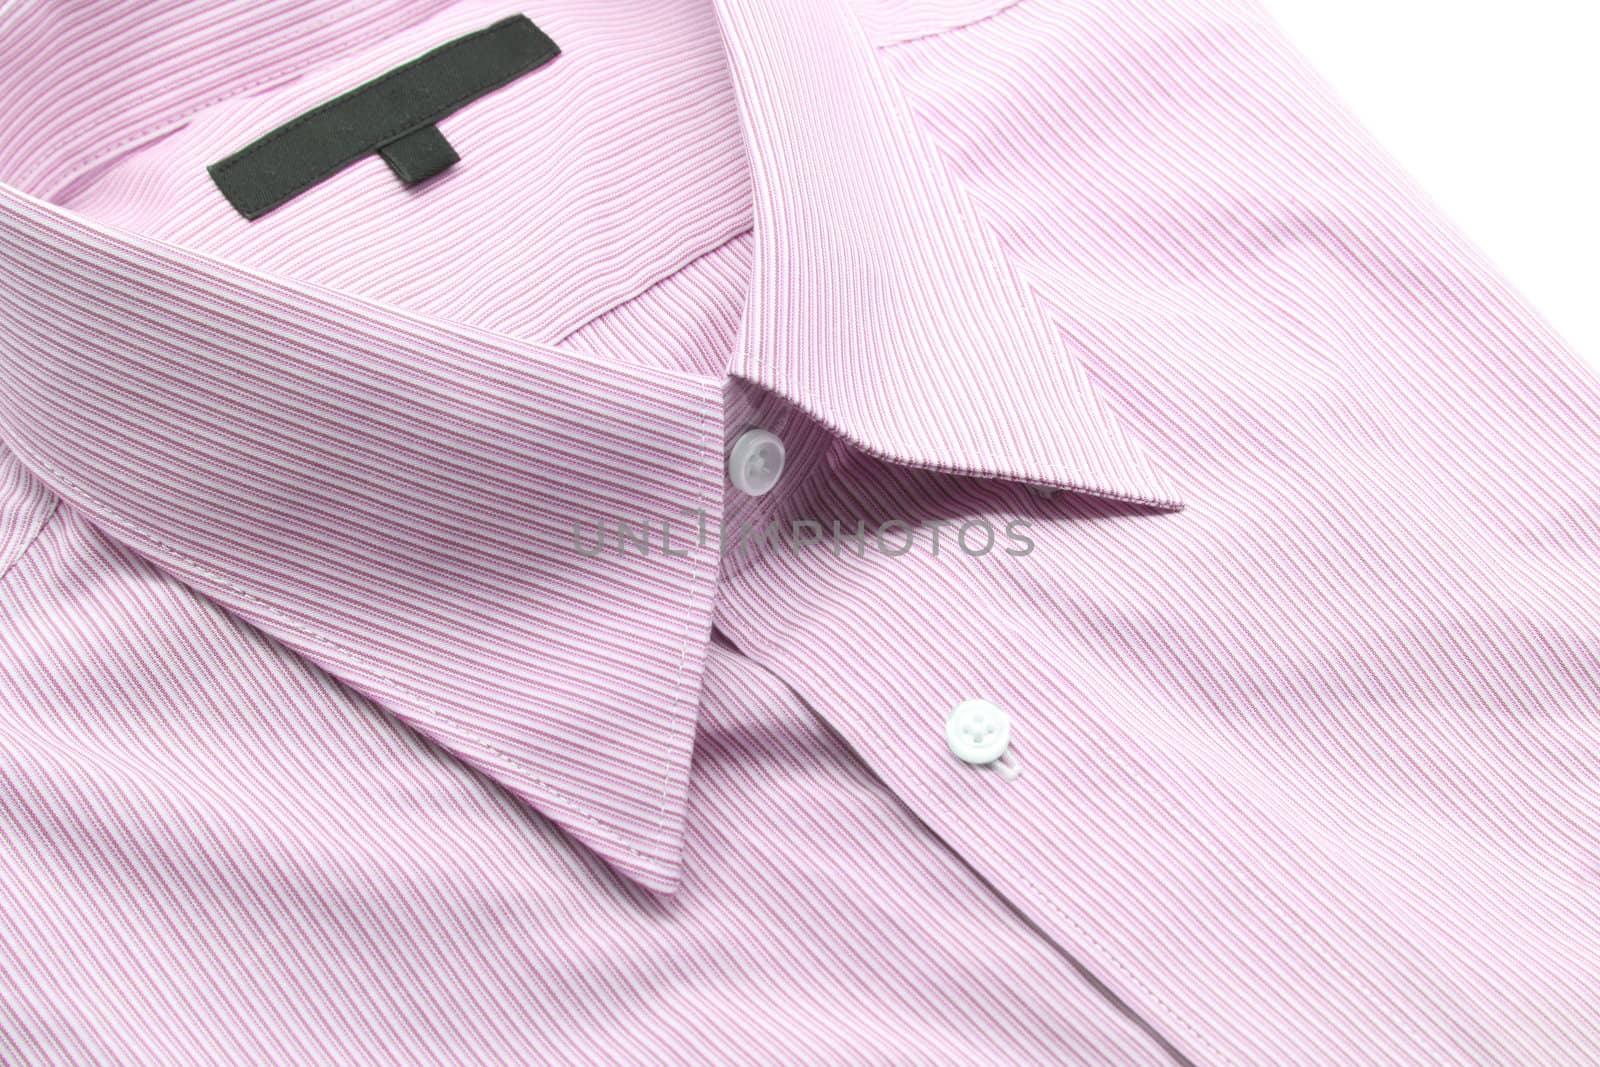 Close up view of a generic red business shirt with a line pattern